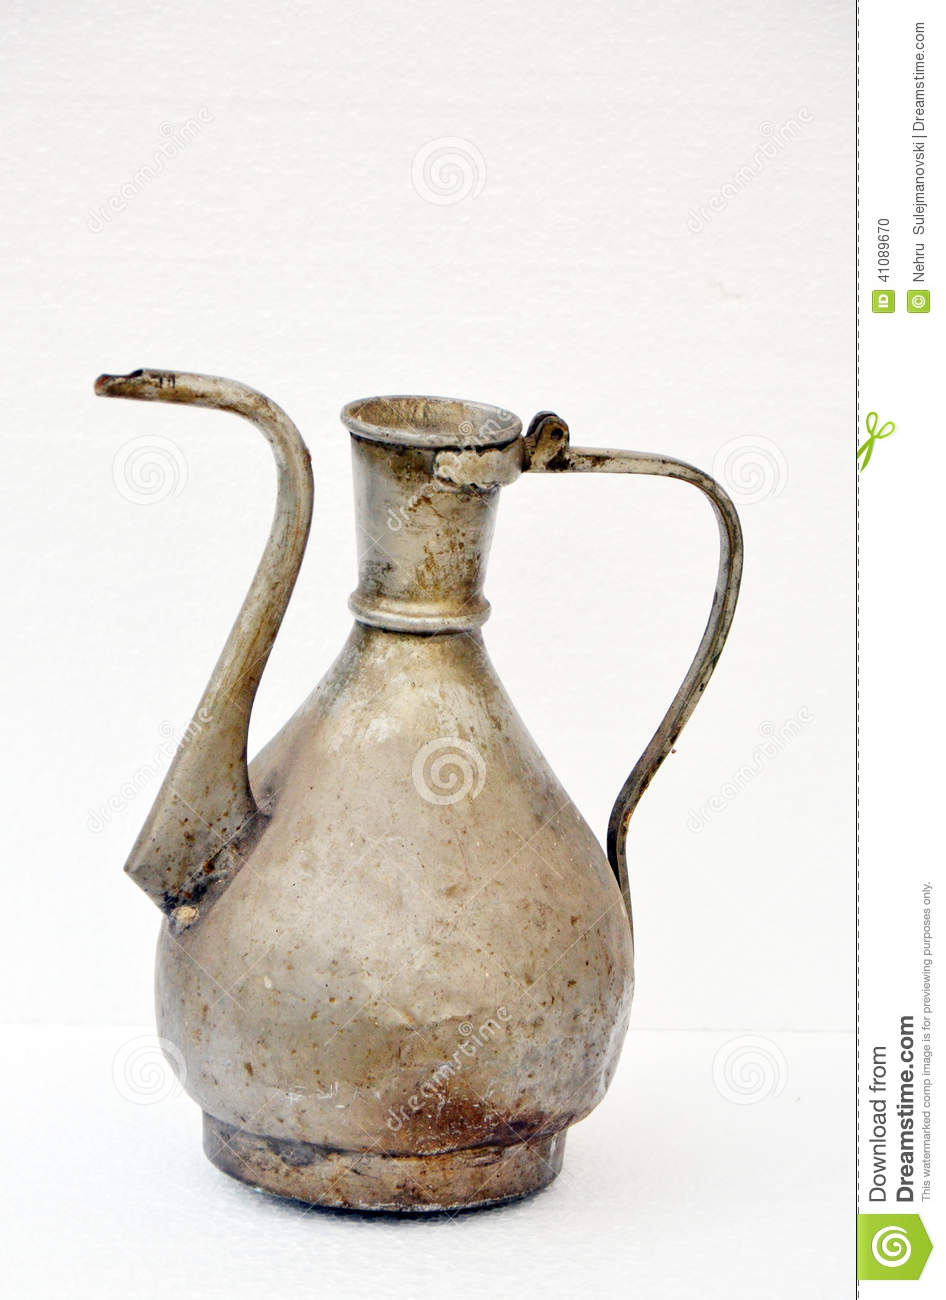 Old Turkish Copper Water Jug Stock Photo   Image  41089670